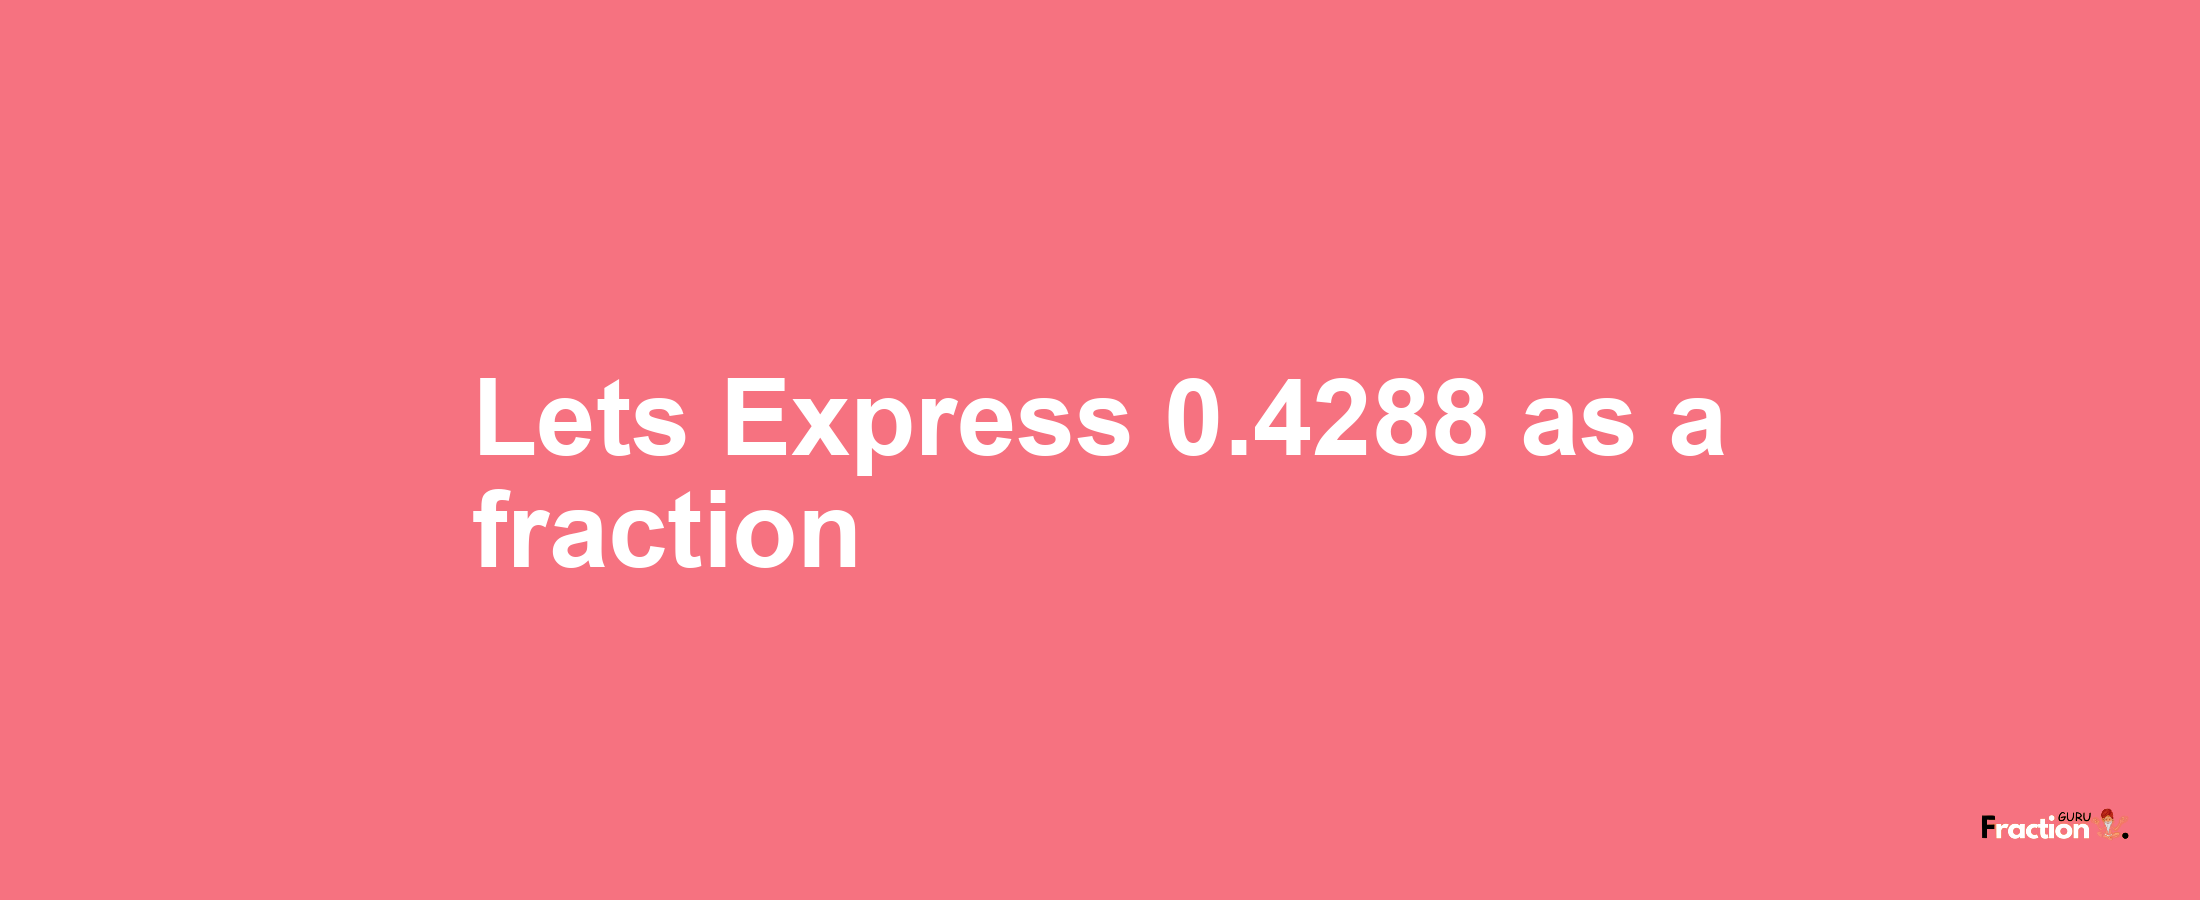 Lets Express 0.4288 as afraction